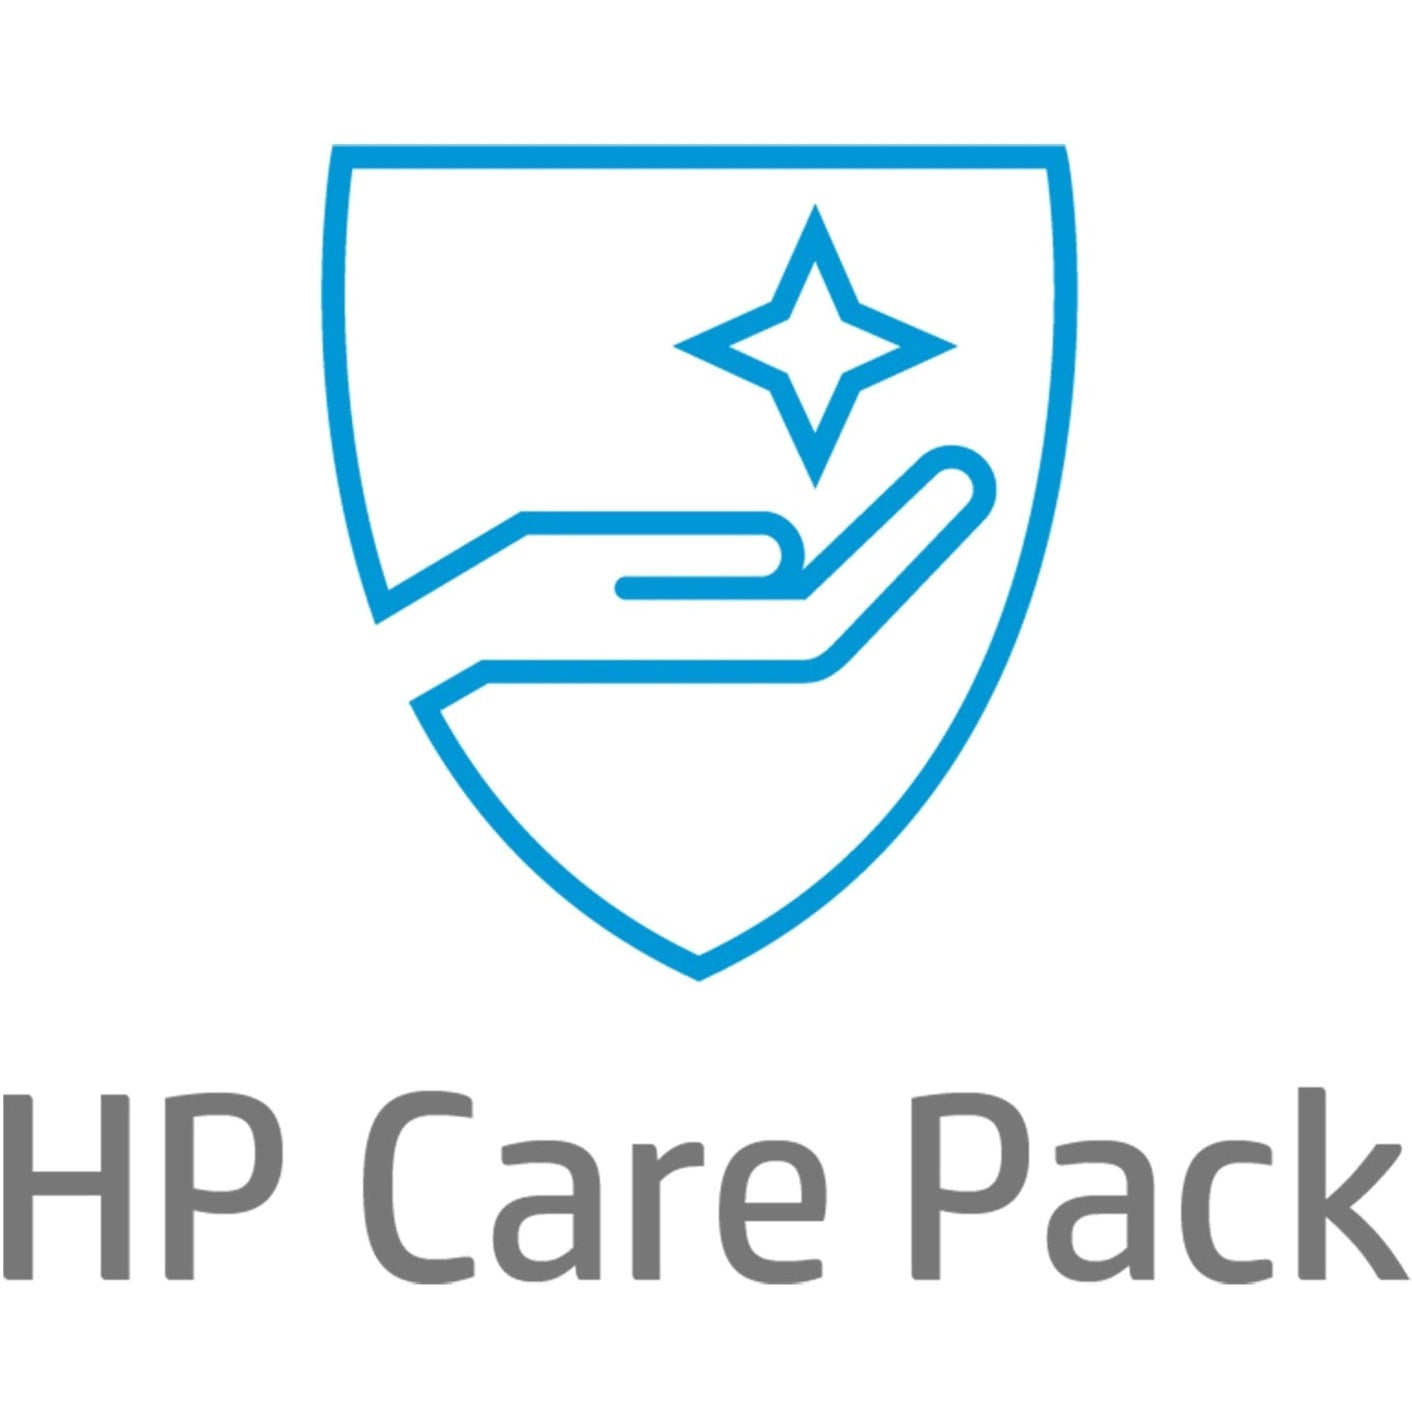 HP Care Pack - Extended Service - 4 Year - Service (U9MZ1E)